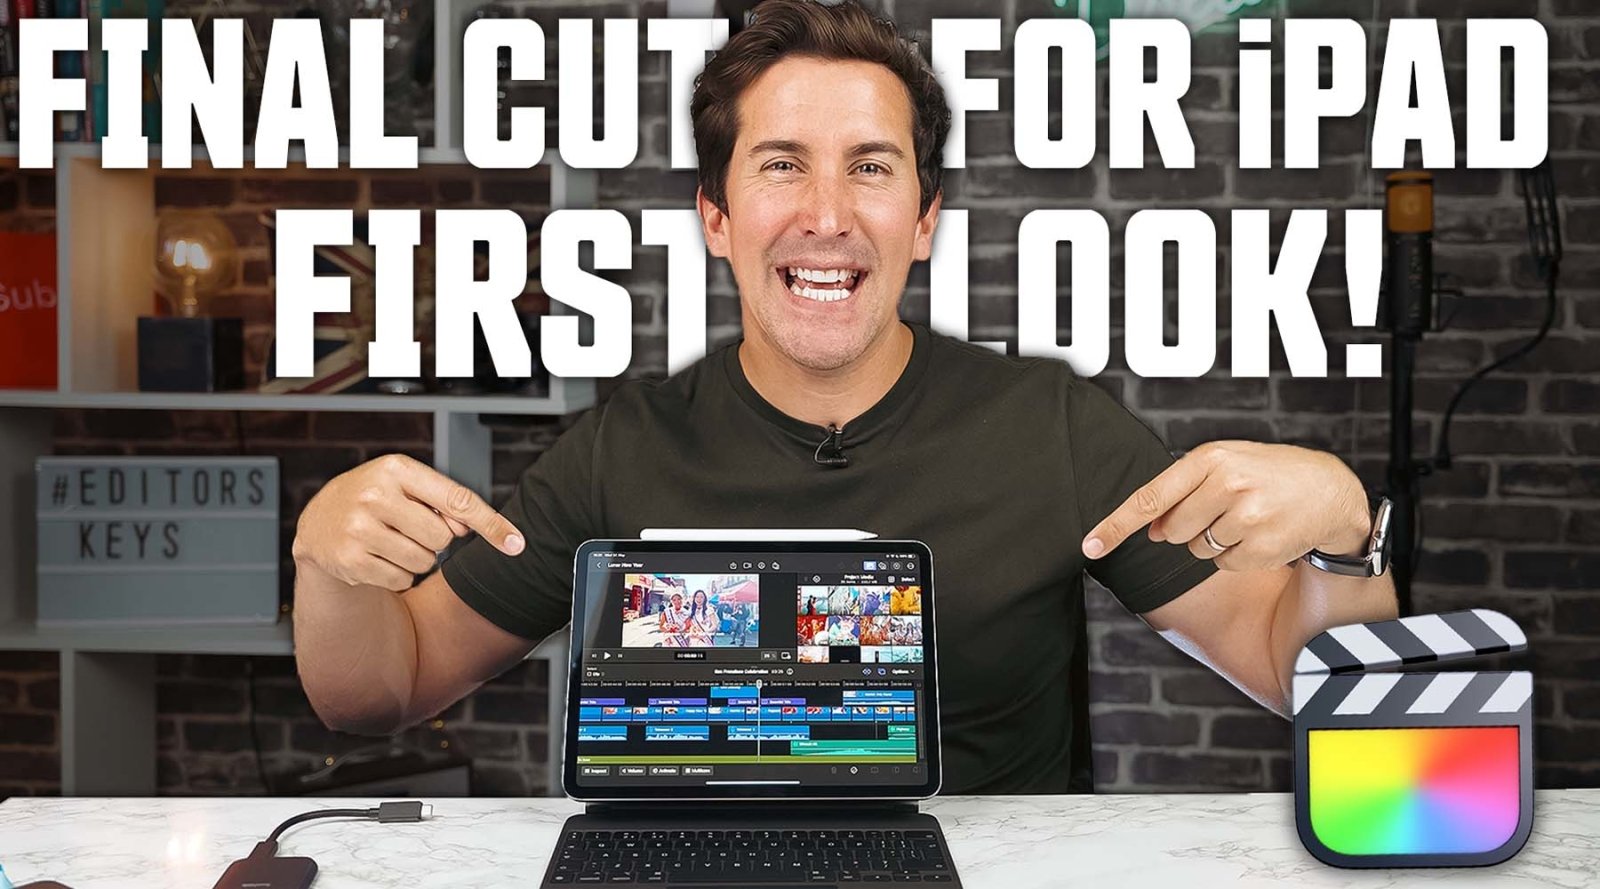 Our First Impressions of Final Cut Pro for iPad! - Editors Keys